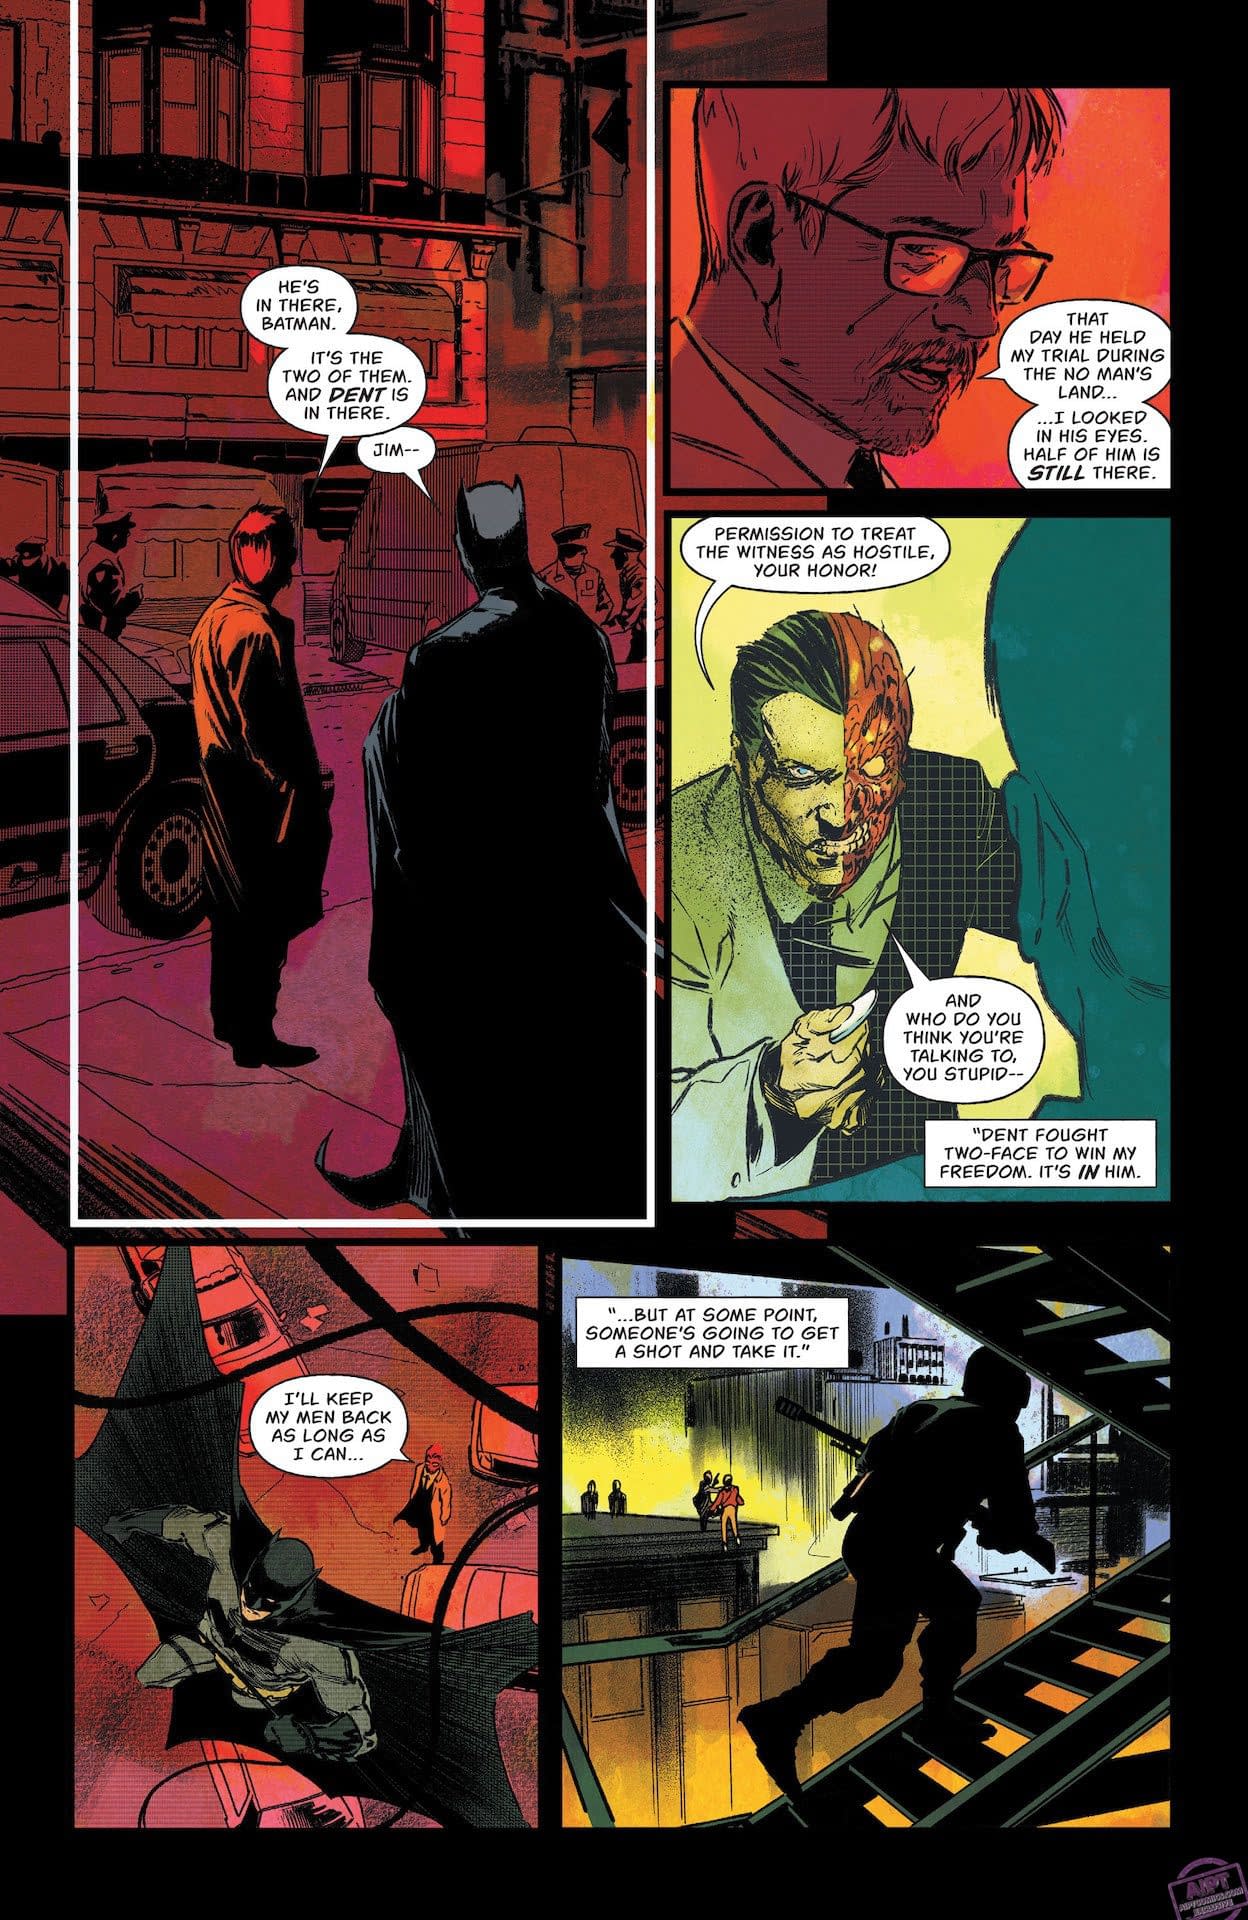 Batman: One Bad Day: Two-Face #1 Preview: Daddy Death Threat Issues